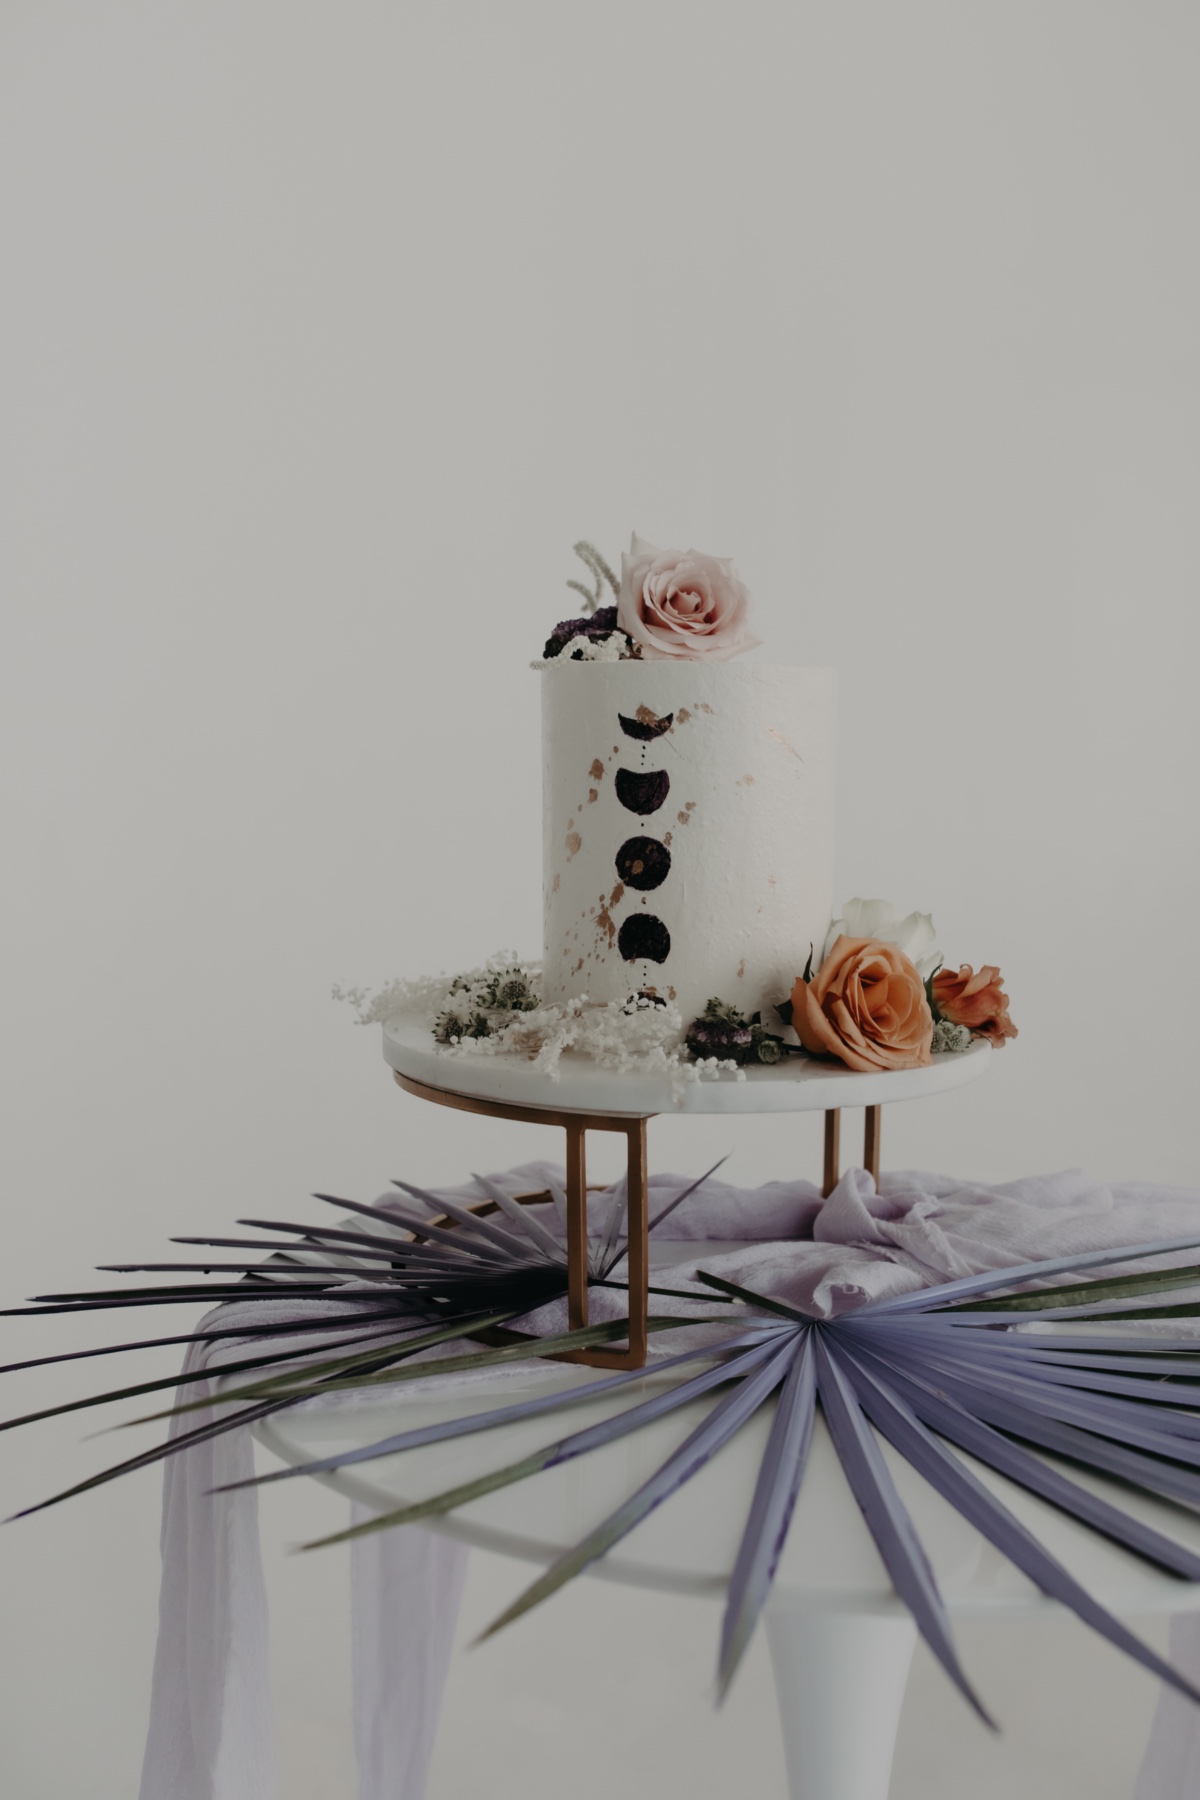 edgy wedding cake with dried flowers